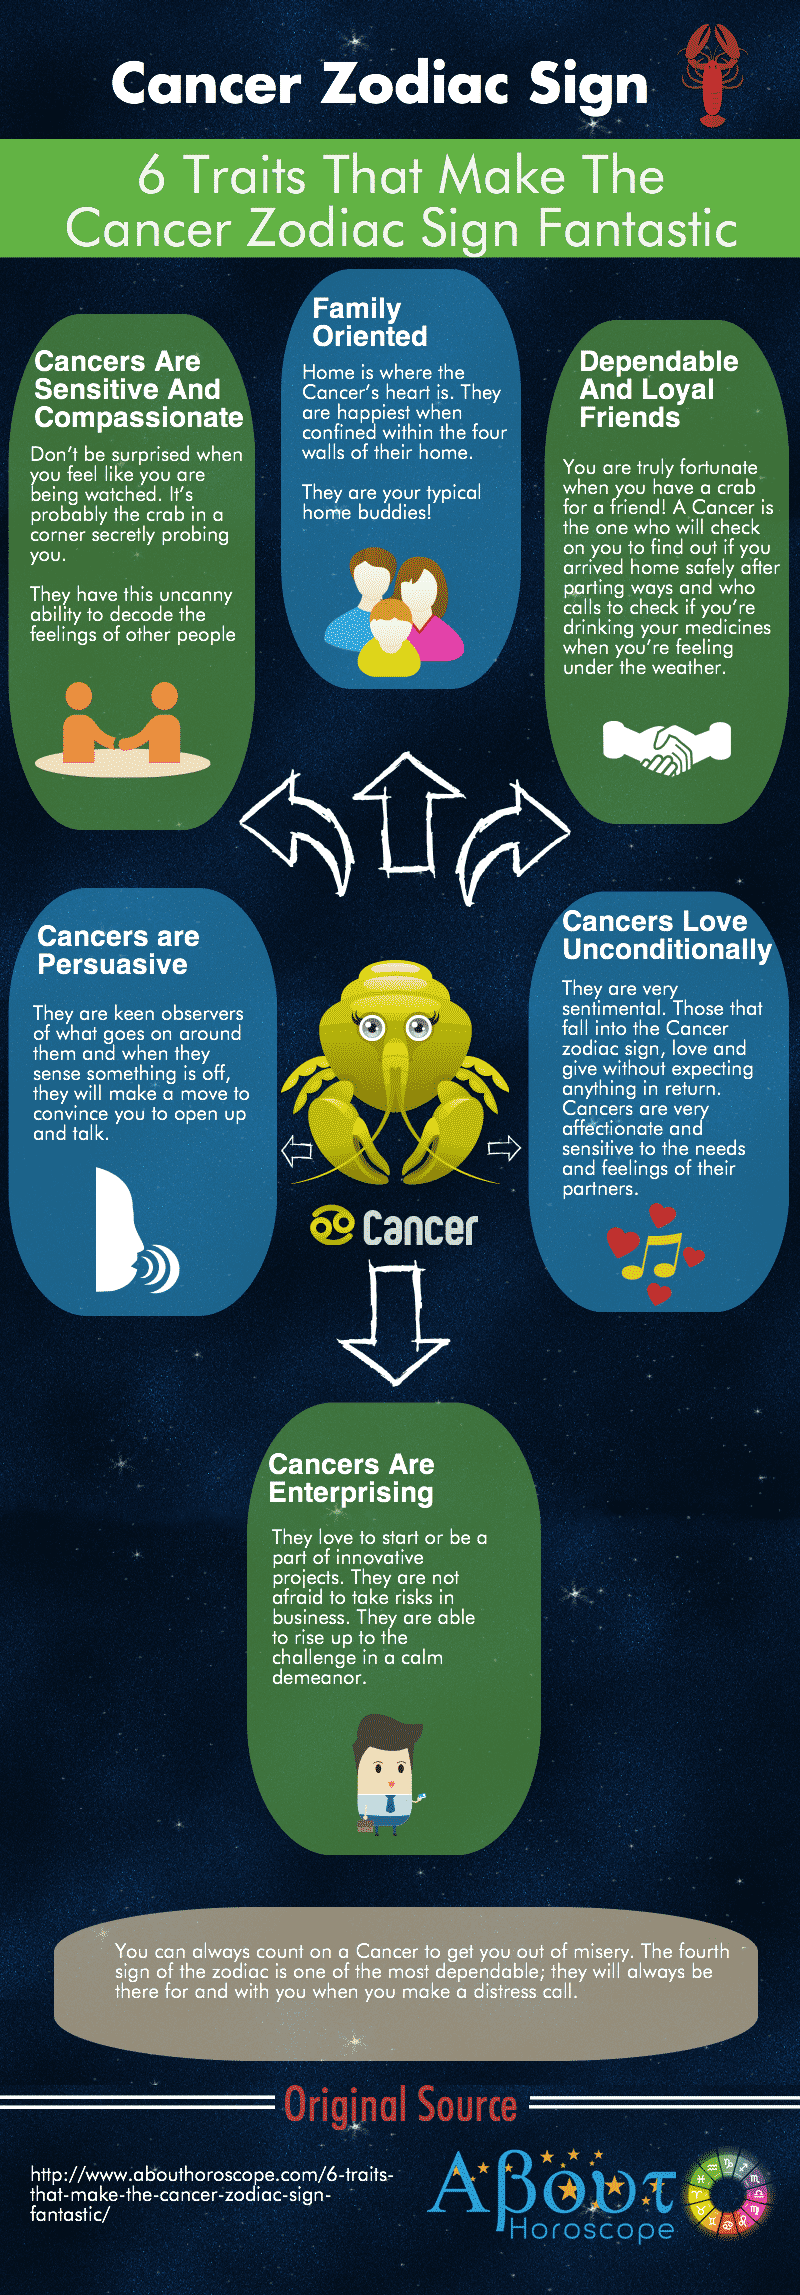 Cancer-Zodiac-Sign-infographic